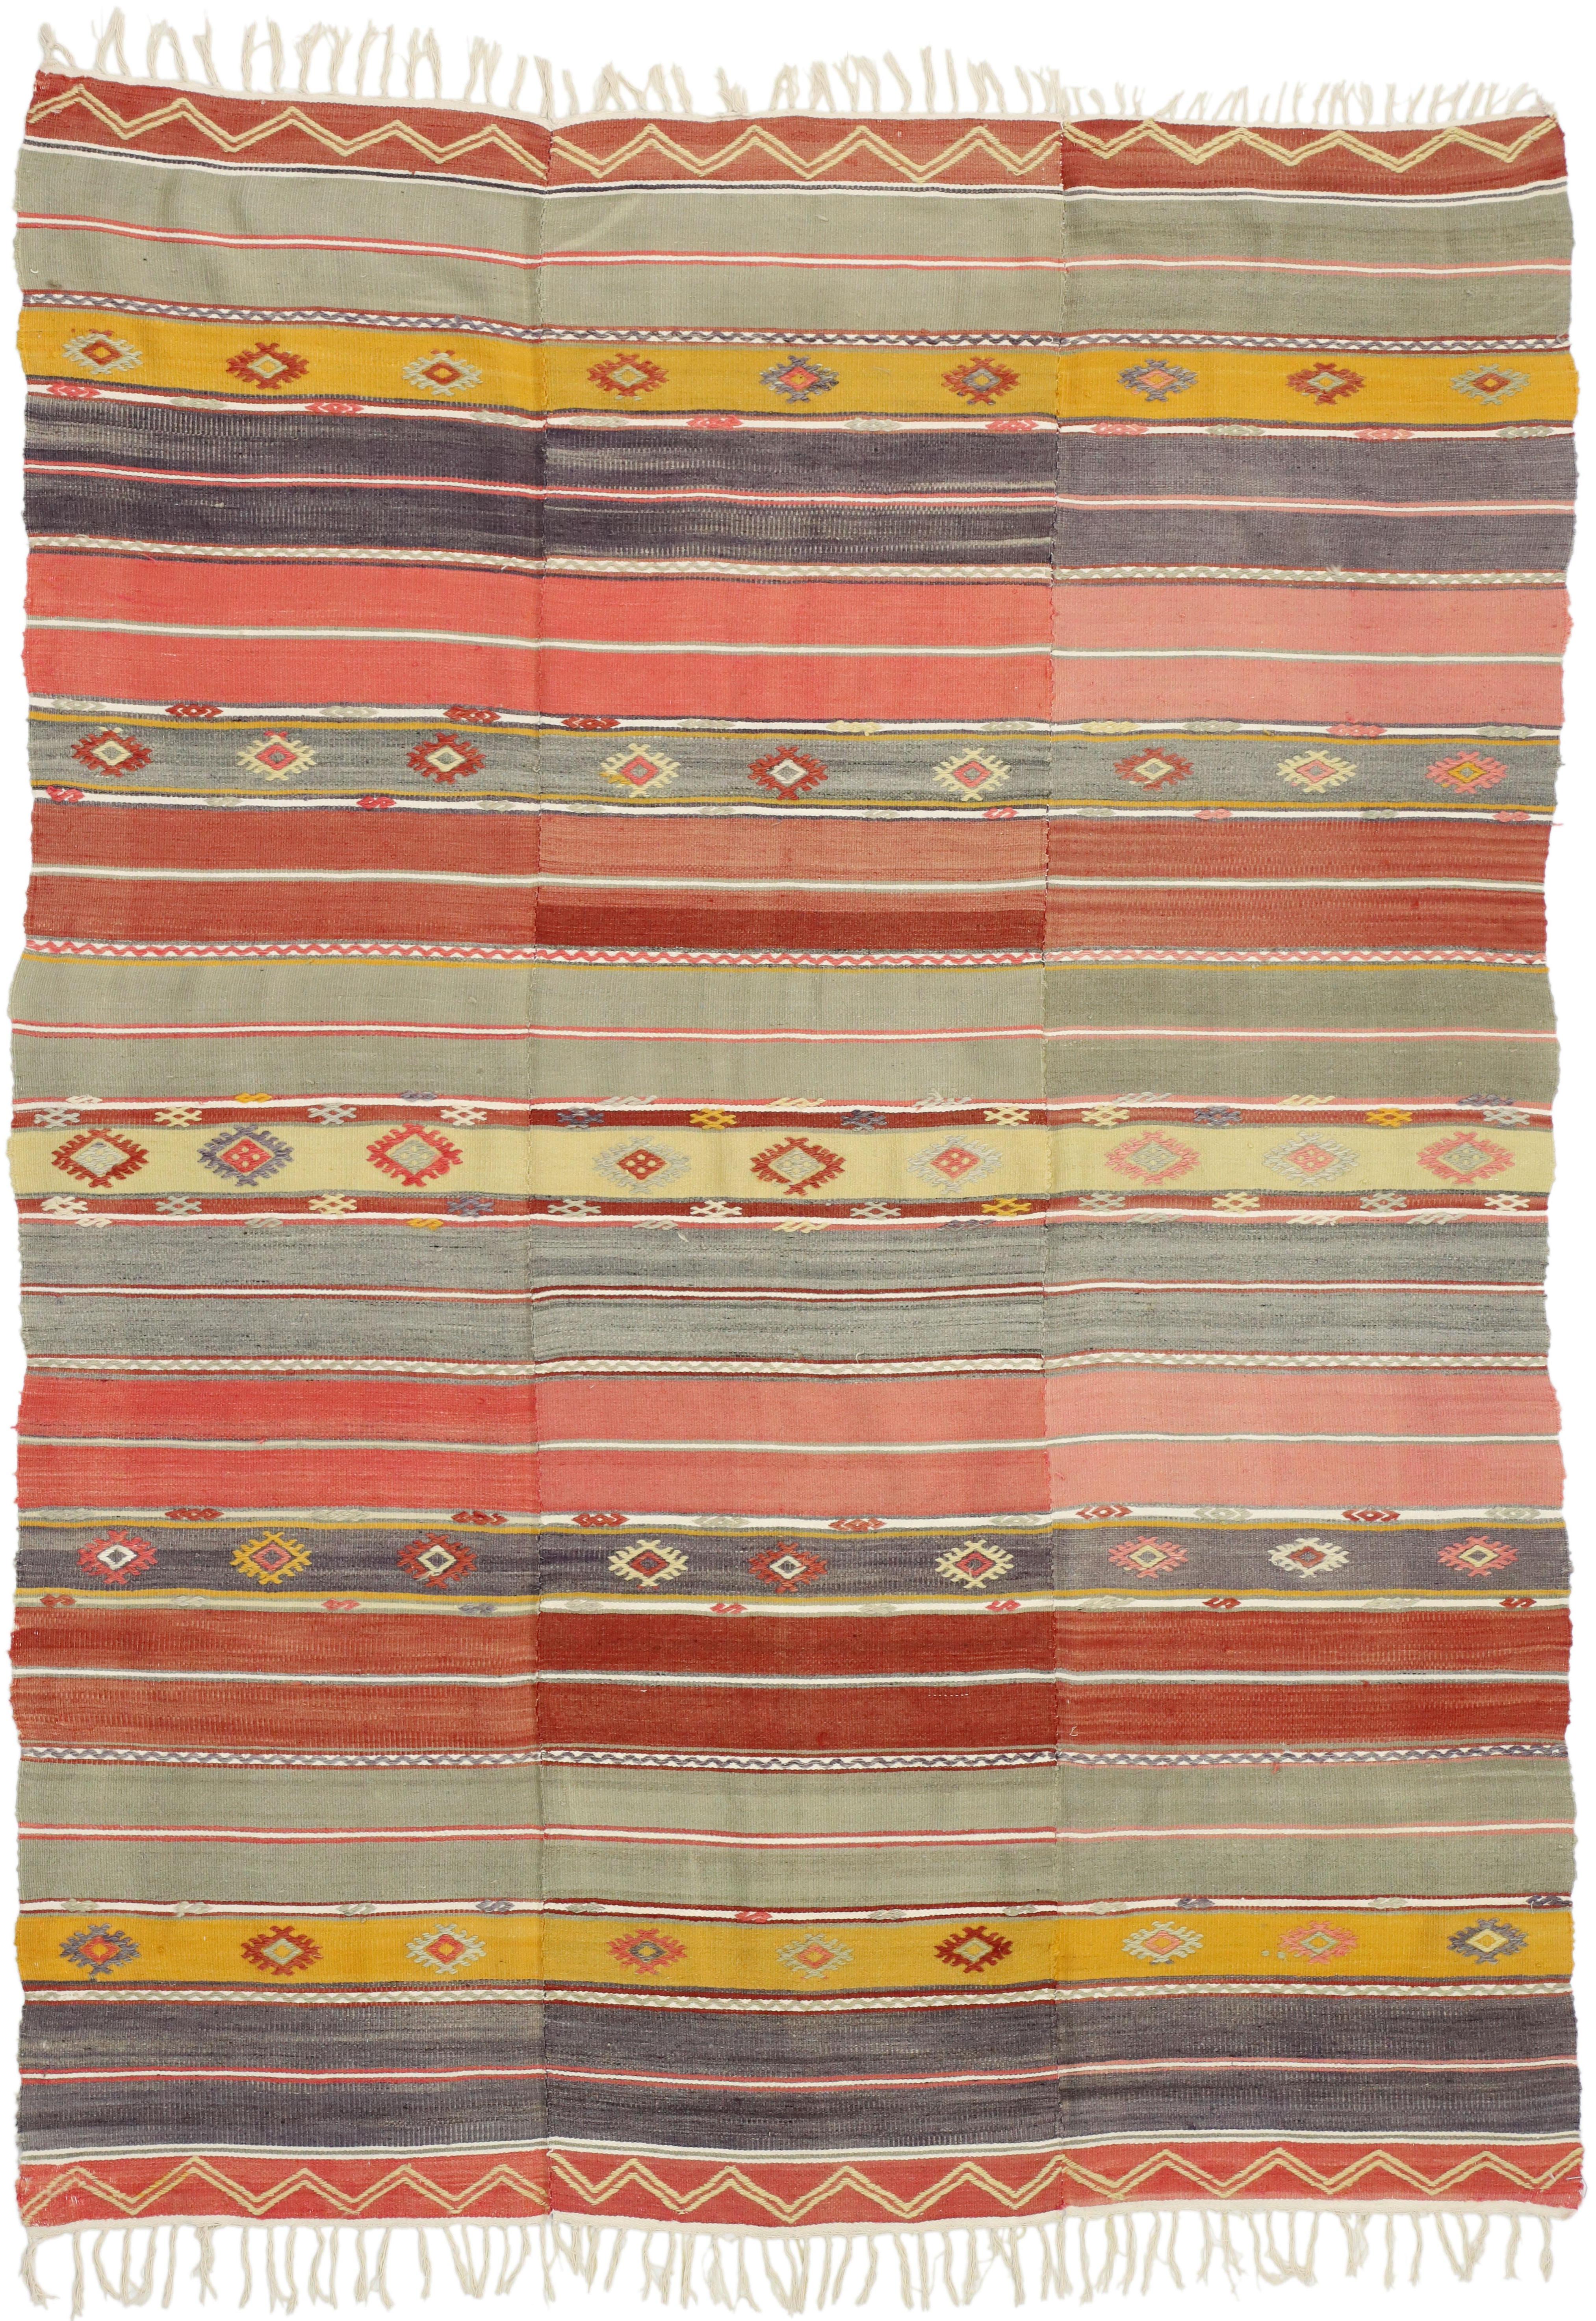 51277 Boho Chic Vintage Turkish Kilim Rug, Flat-Weave Rug with Tribal Style. This vintage Turkish Kilim rug features multicolor geometric tribal motifs and stripes sit on a warm brown background. This kilim rug is rich in Turkish culture, as the